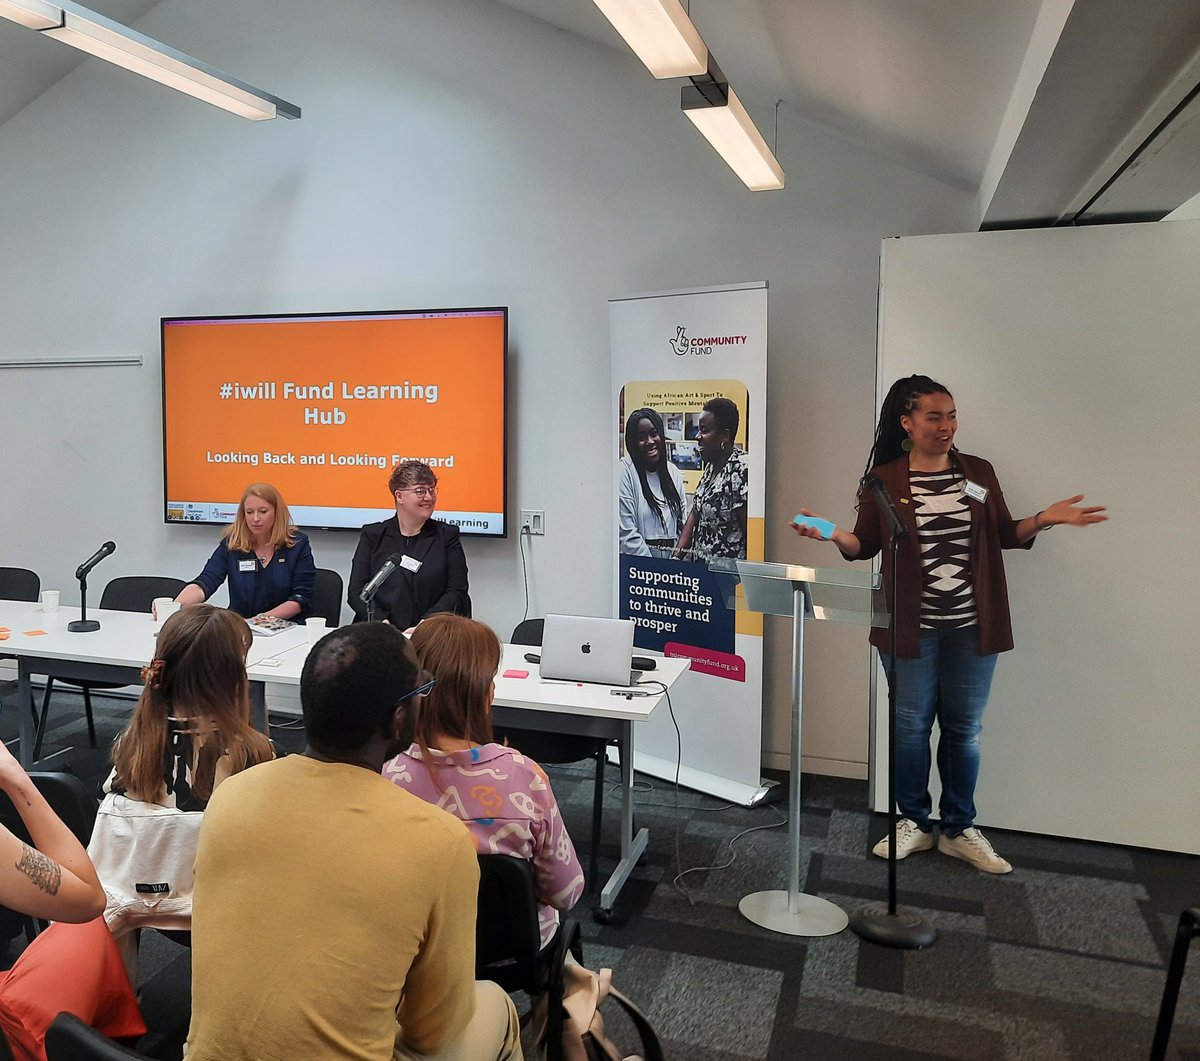 @hollynotcutt from @iwill_movement opening the #iwill Learning Hub event this morning in London. Fantastic to see so many Match Funders and supporters in the room on our 10th anniversary. Looking forward to hearing the research from @DartingtonSDL